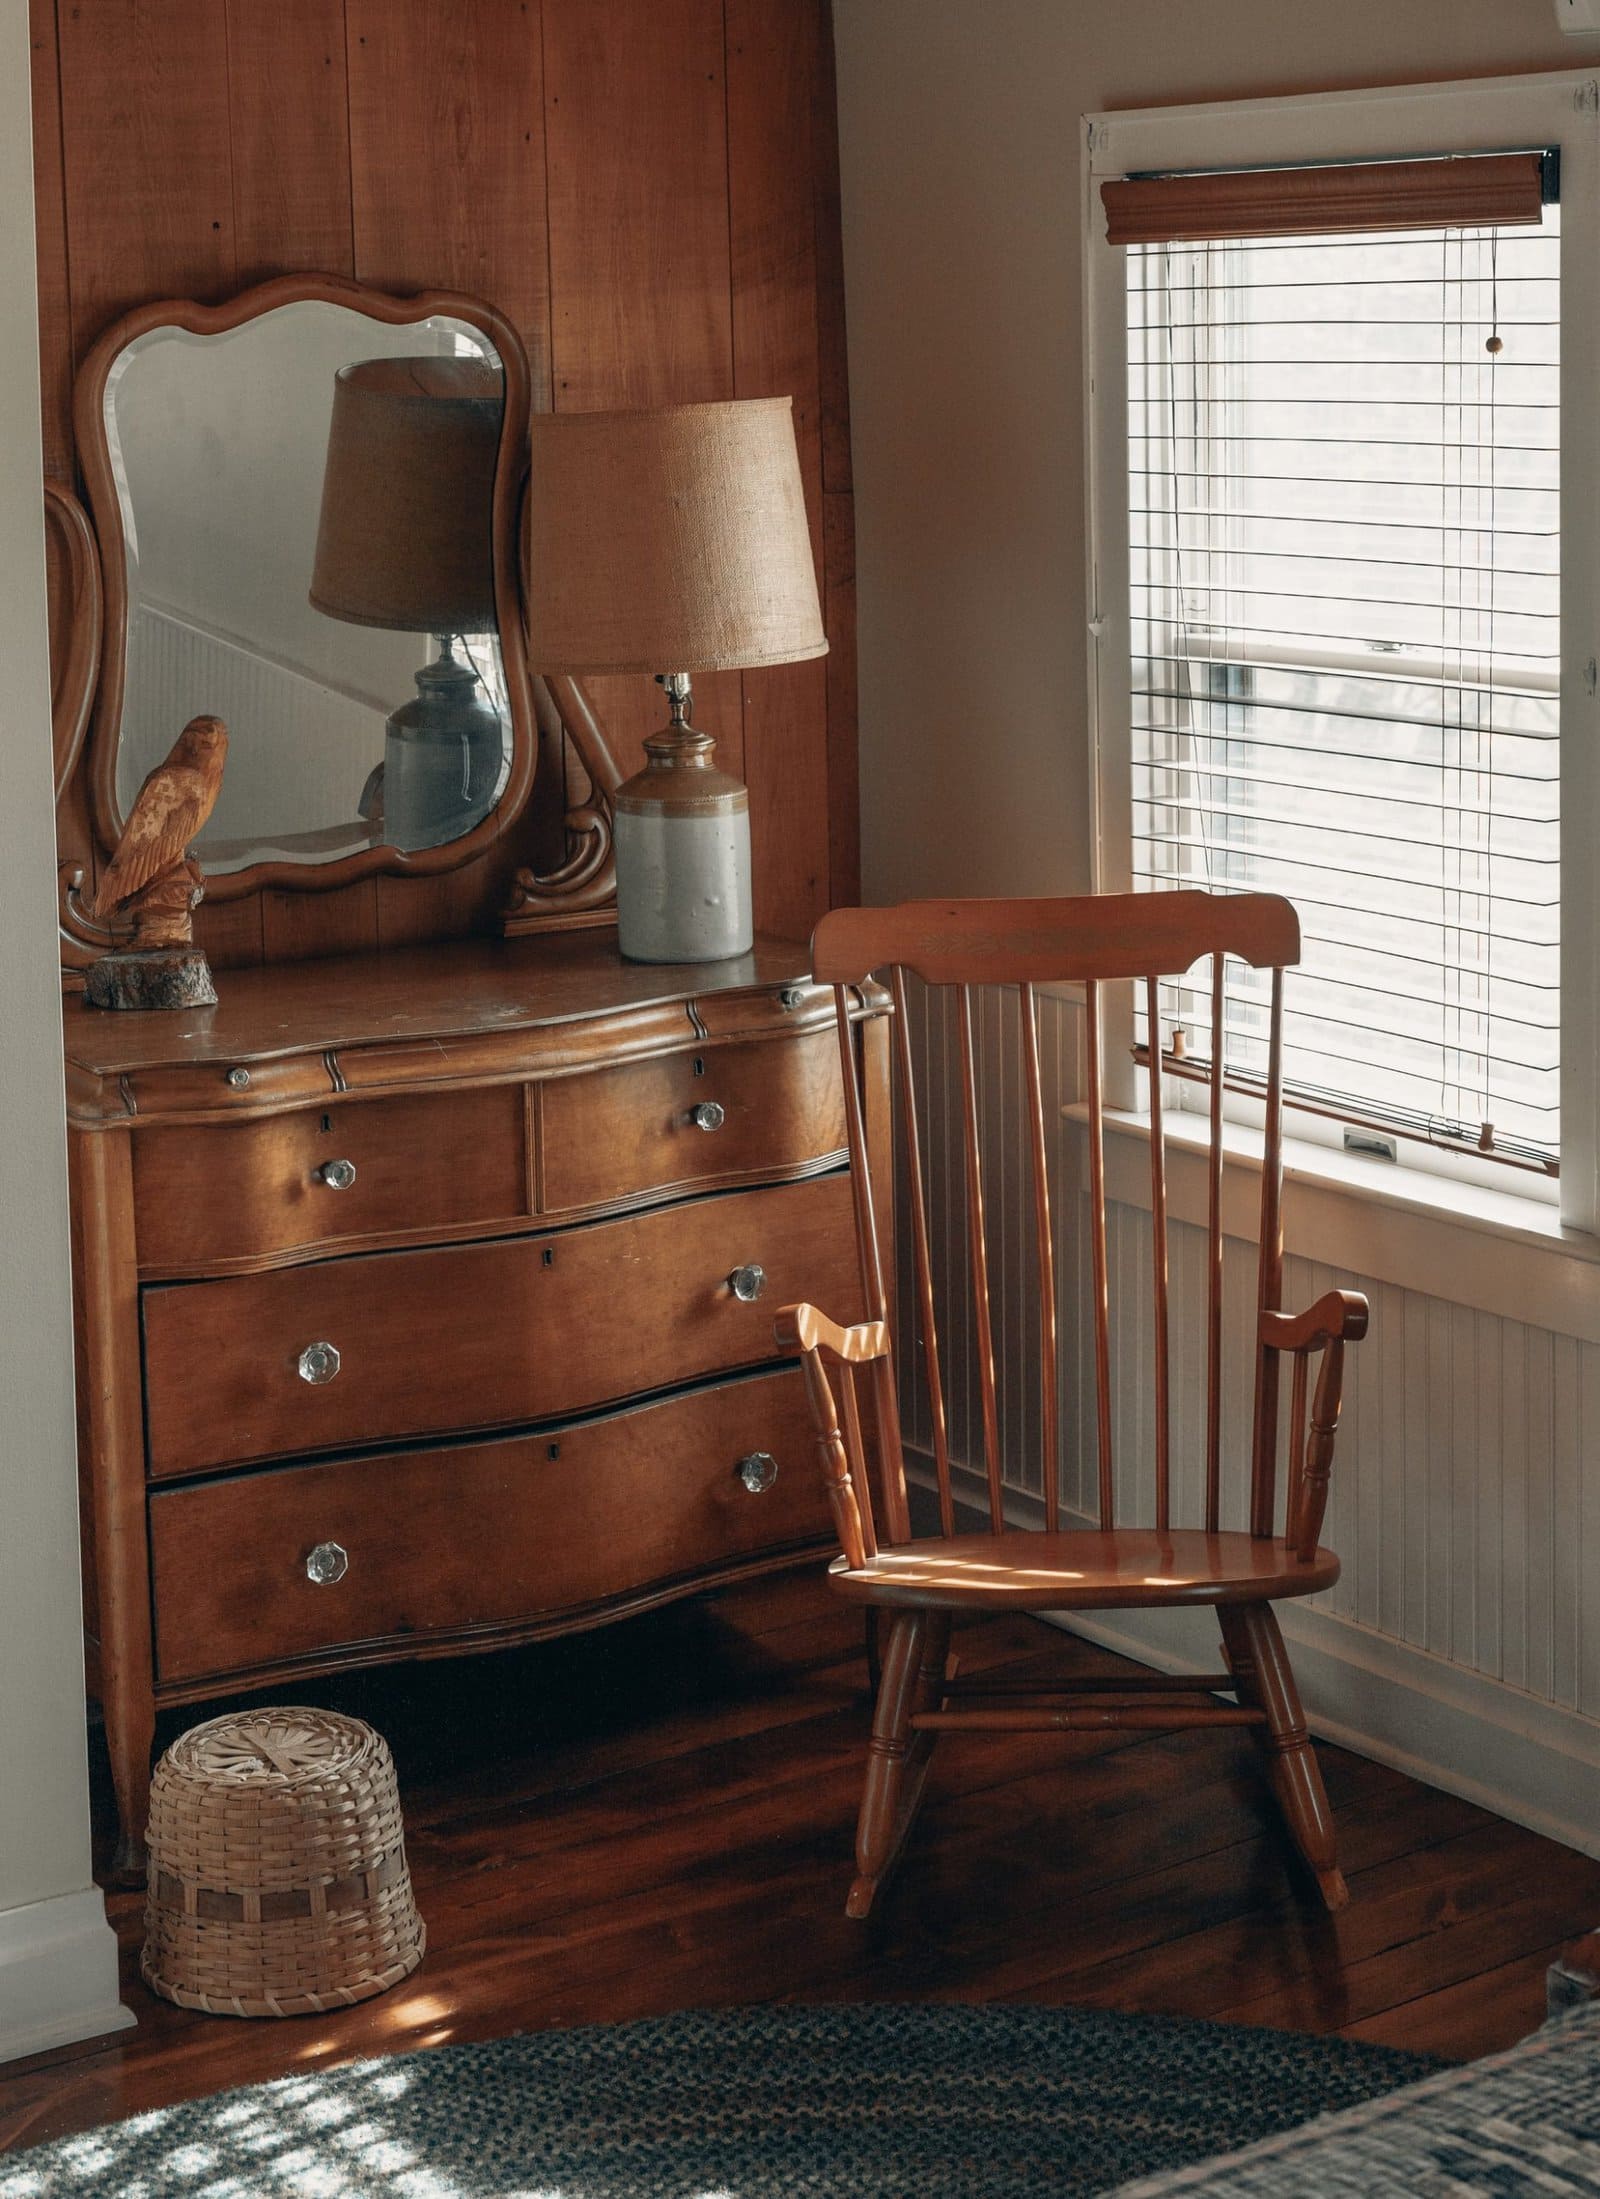 6. Tall Antique Dresser and Mirror scaled